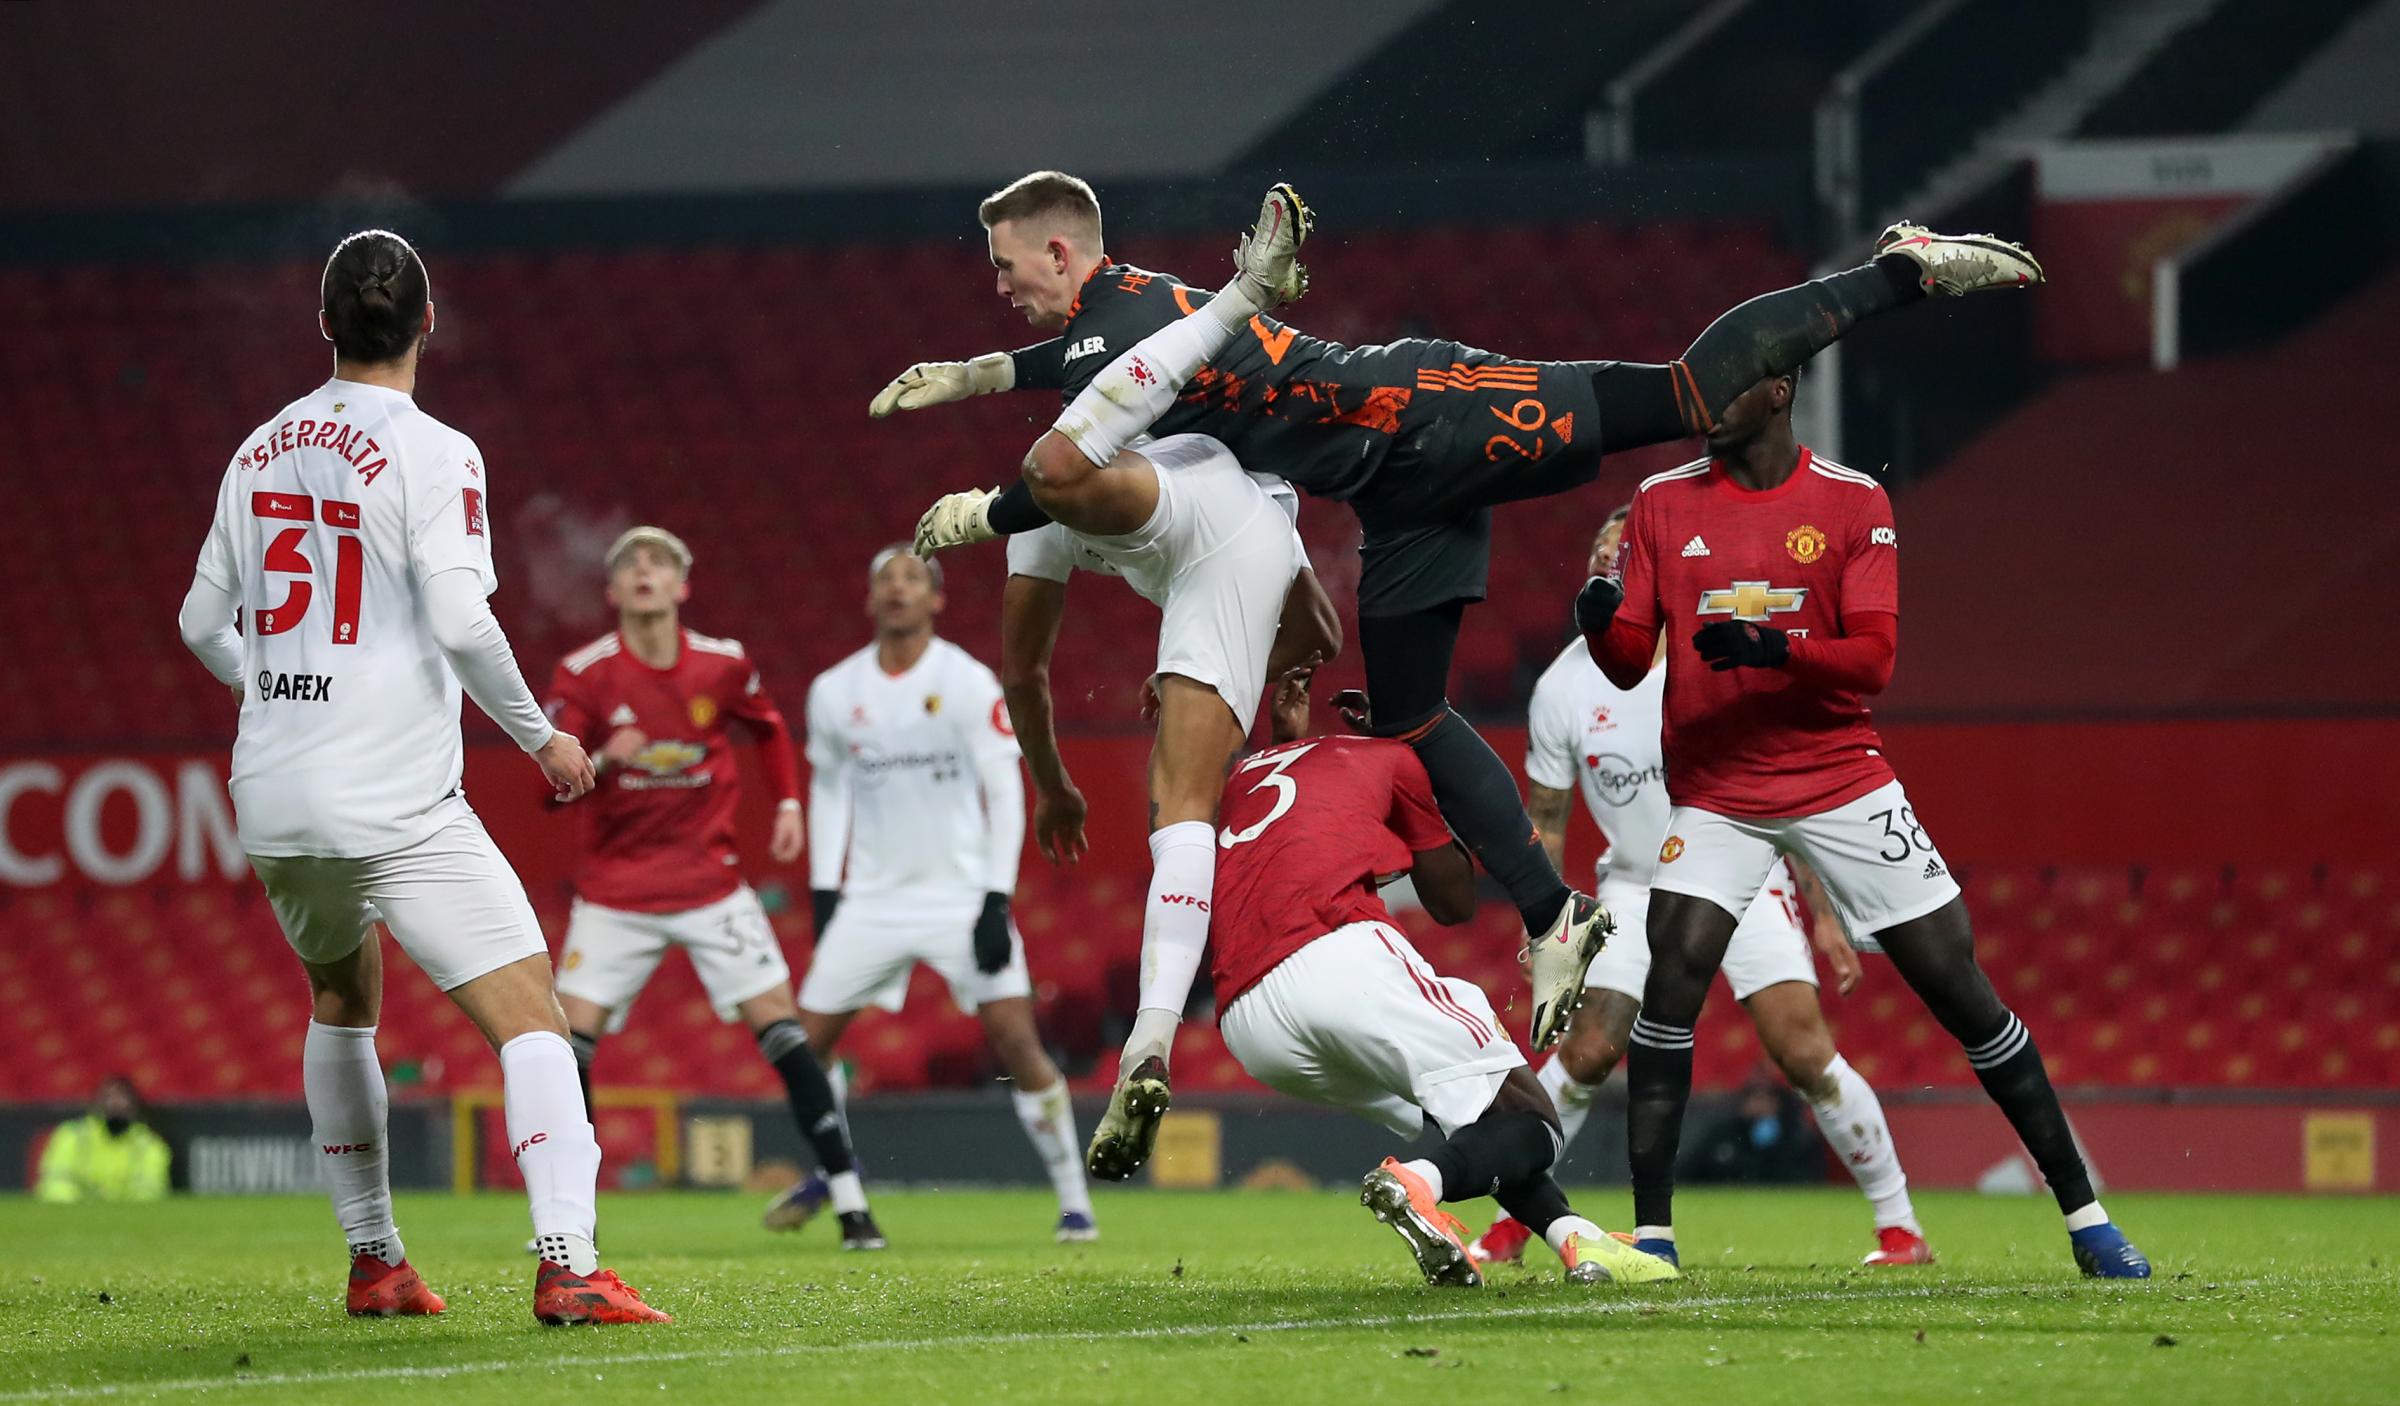 Watford beaten by Manchester United in FA Cup third round